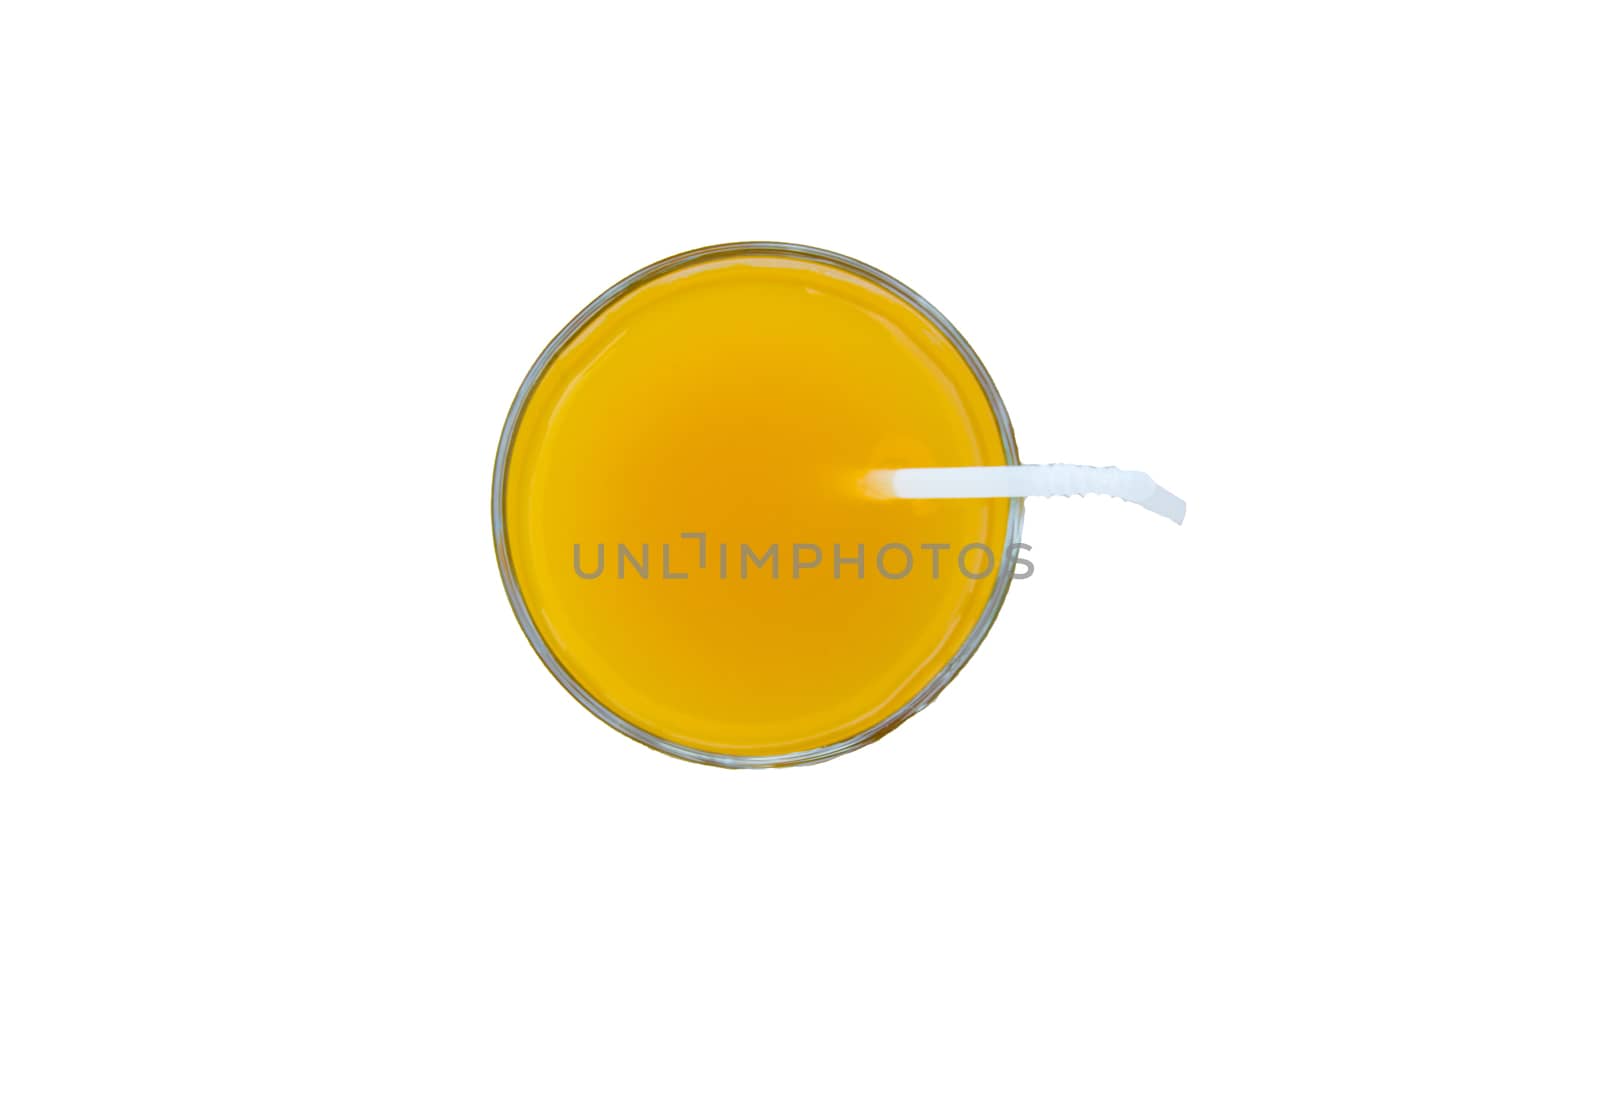 Summer drink - freshly squeezed orange juice in a glass with a straw tube, top view, isolated on a white background with clipping, minimalism style.